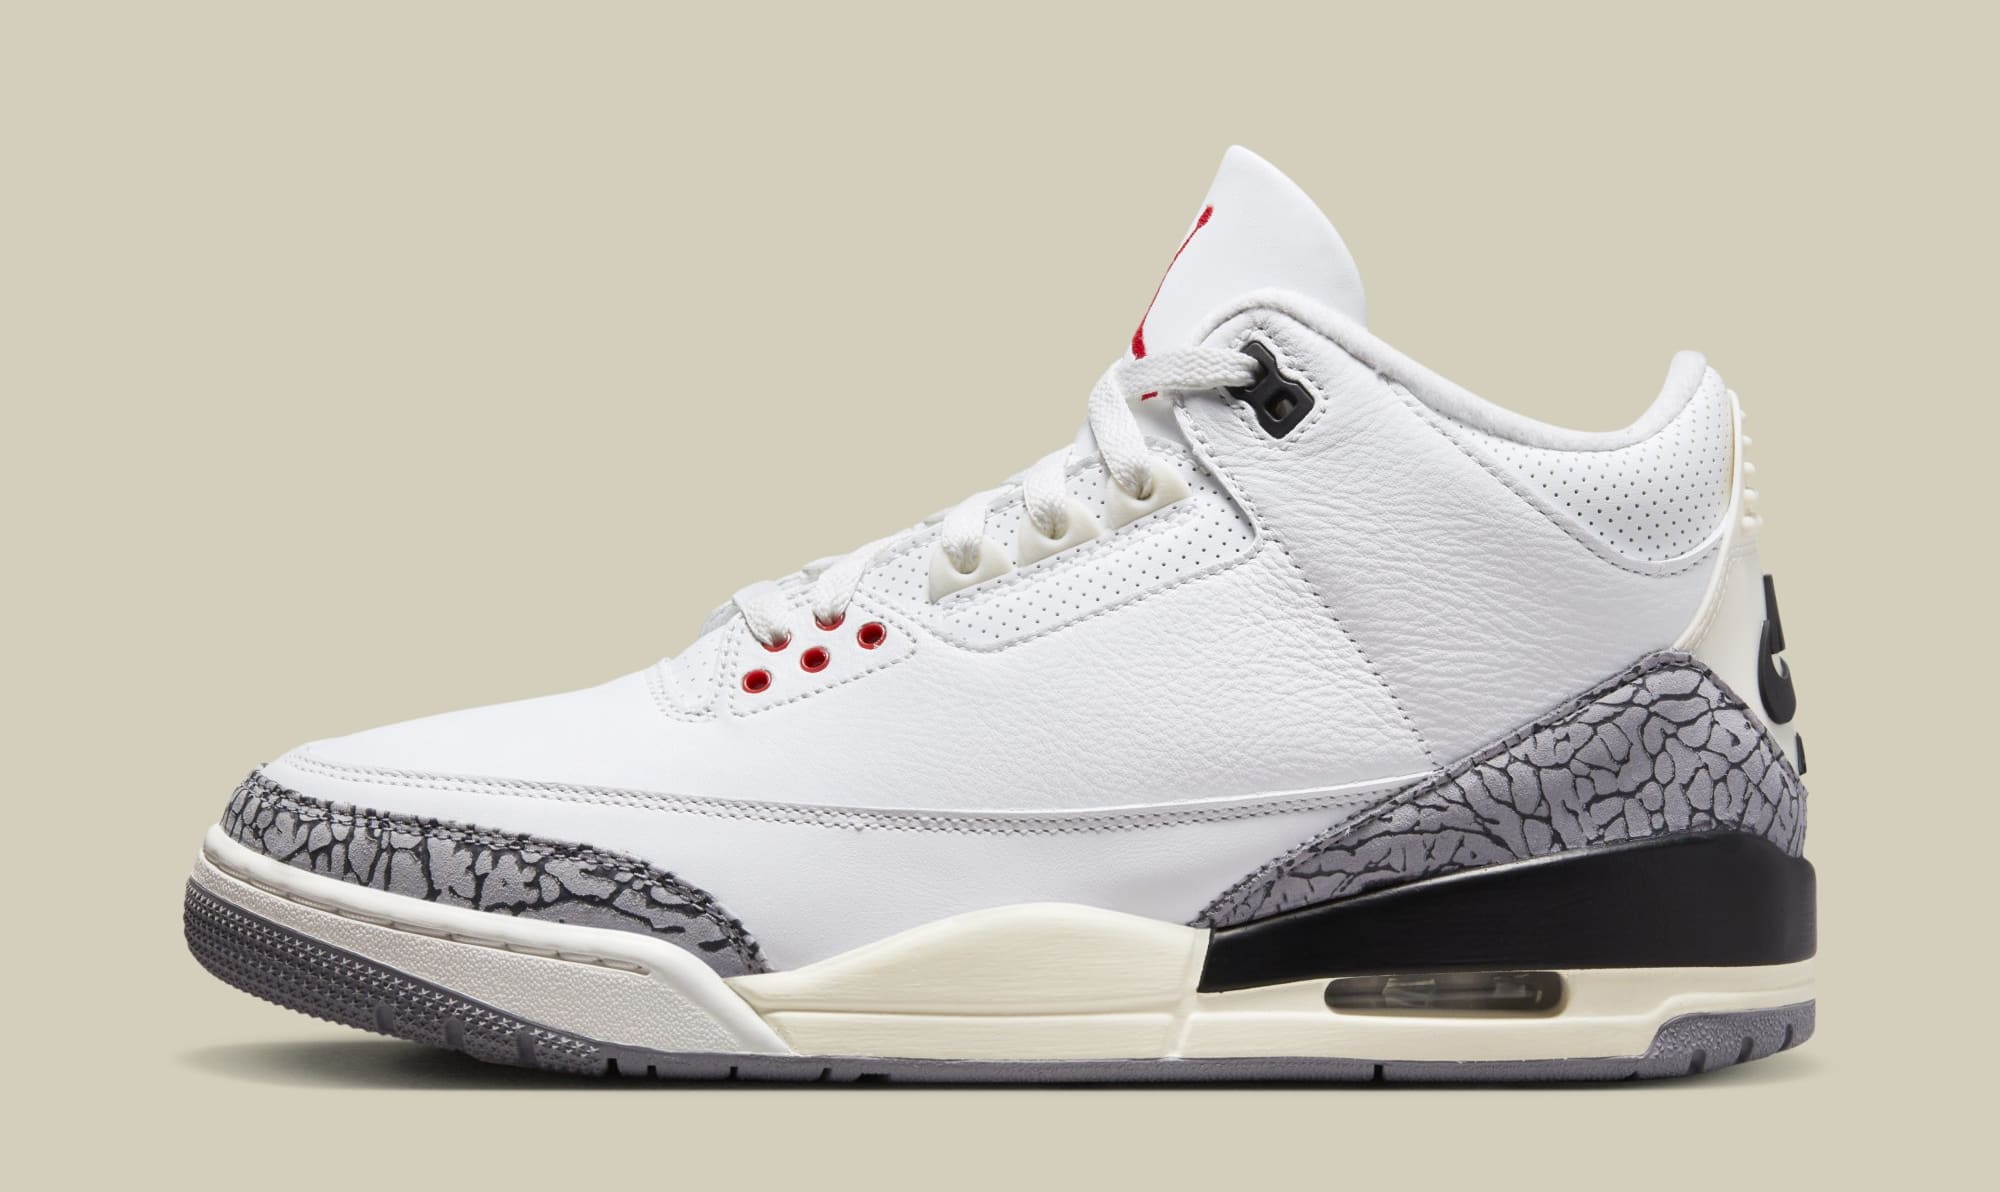 The Air Jordan 3 Blue Cement will be live early at Foot Locker at 08  Reimagined DZ5485 - 612 2022 Release Date Info - The Air Jordan 3 Blue  Cement will be